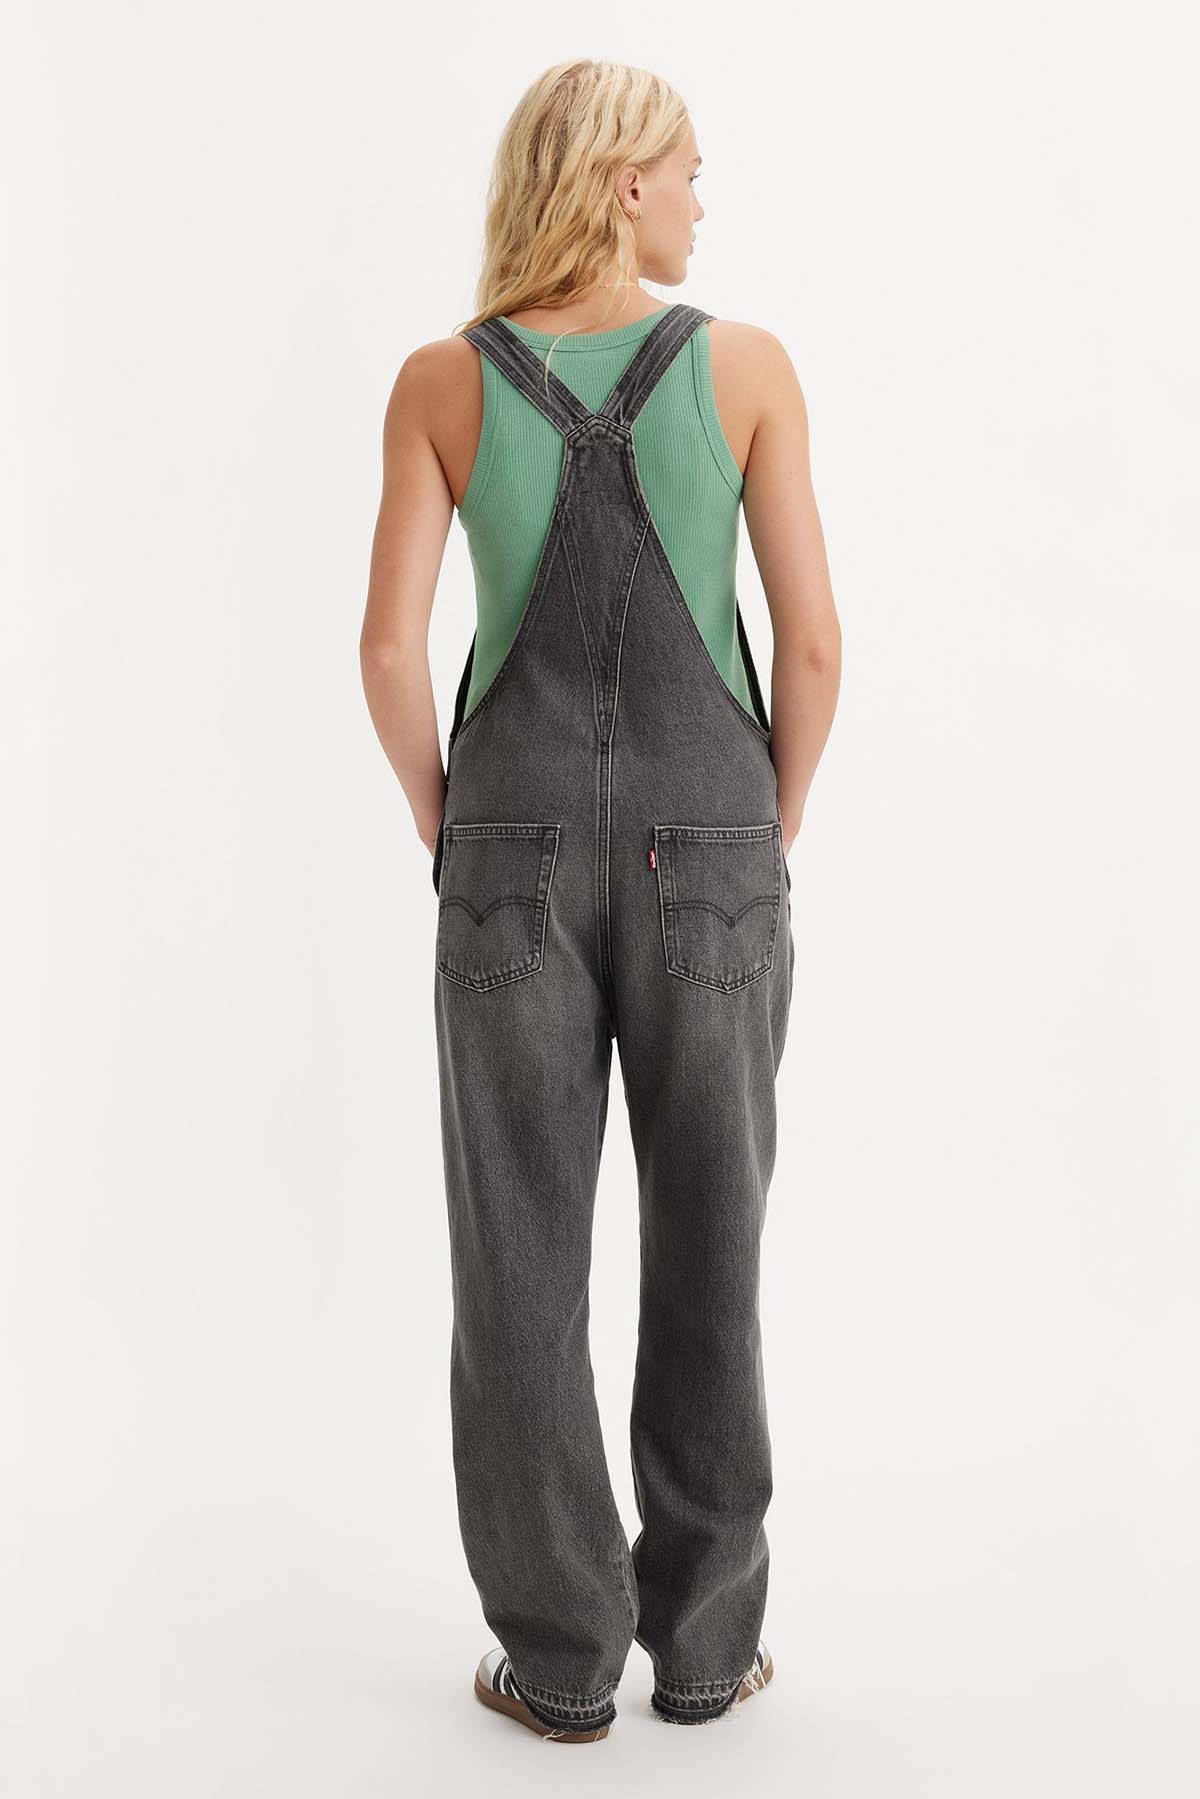 Levis - Vintage Overall - County Connection - Back